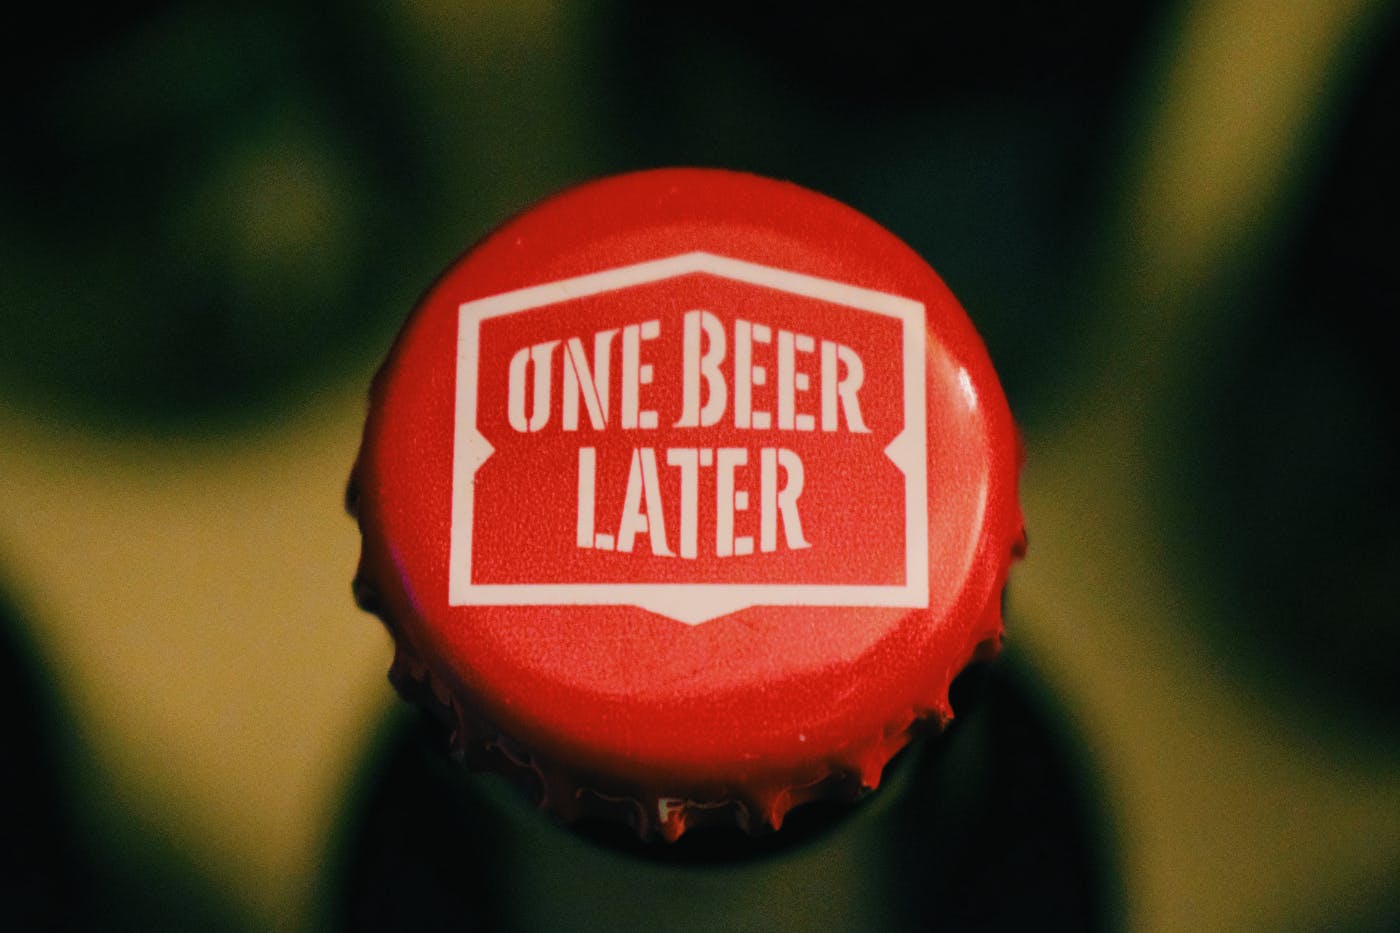 A red bottle cap with One Beer Later printed on it